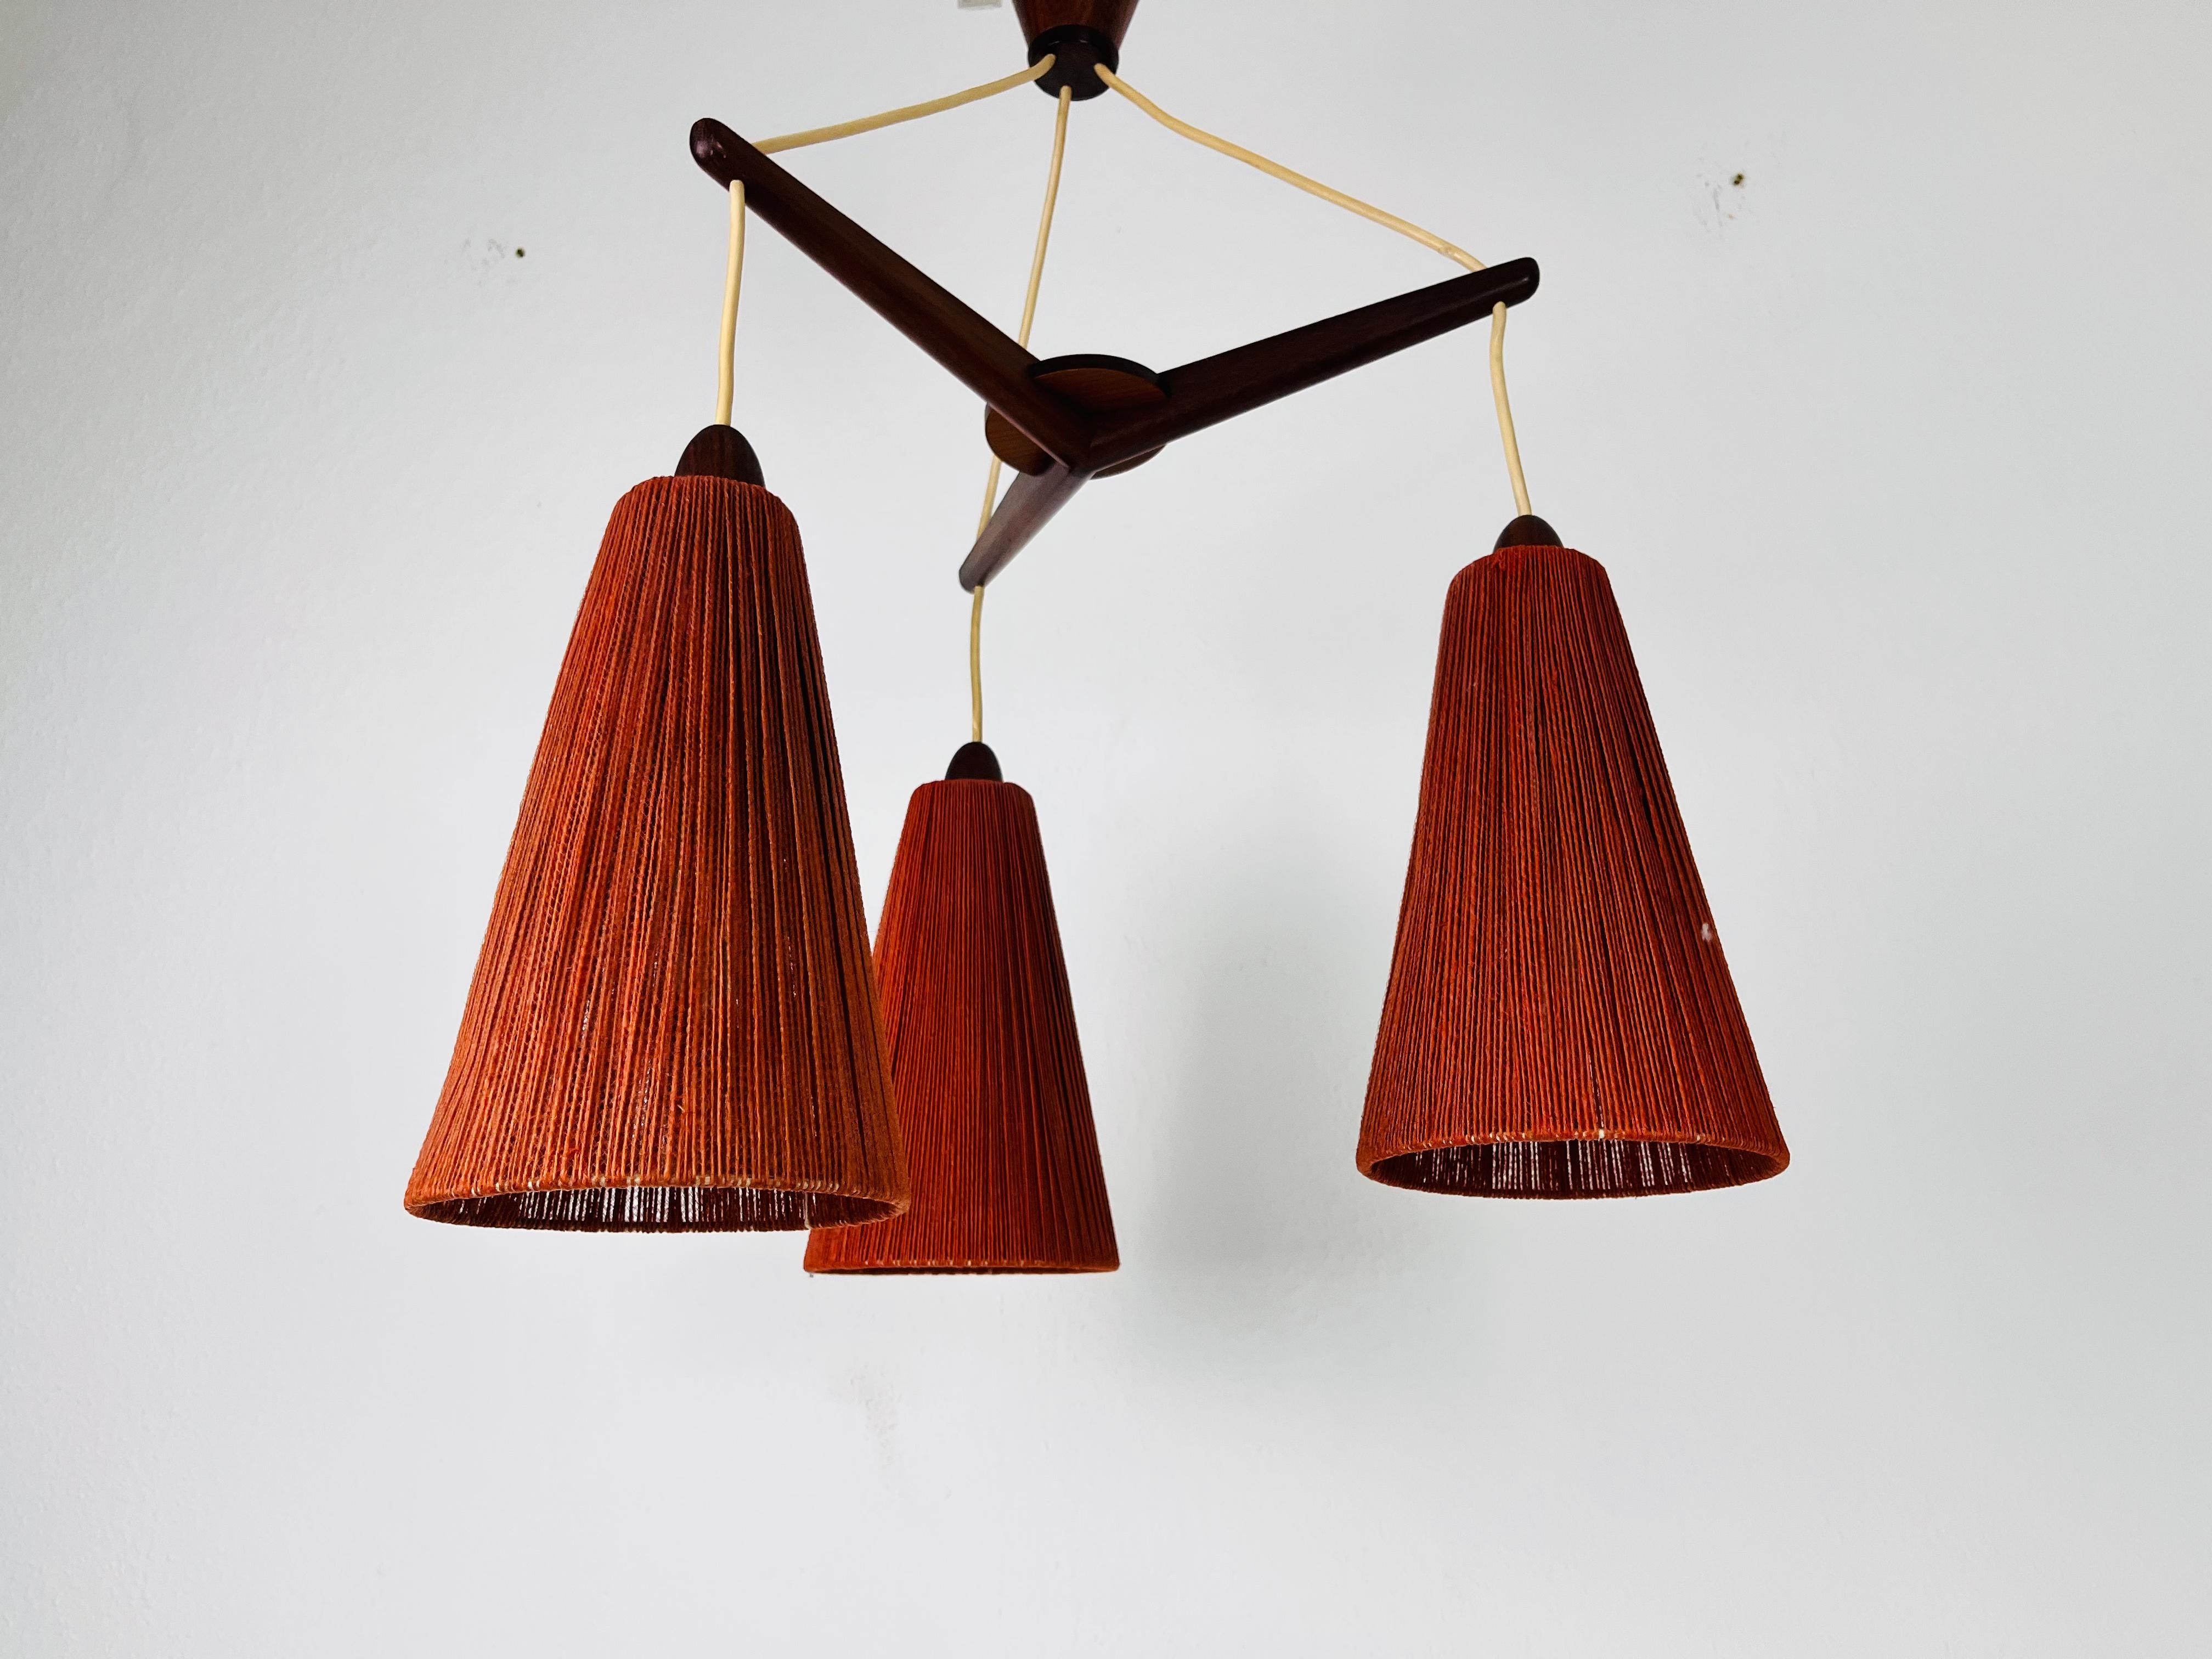 Swiss Midcentury Teak and Cord Shade Hanging Lamp by Temde, circa 1960 For Sale